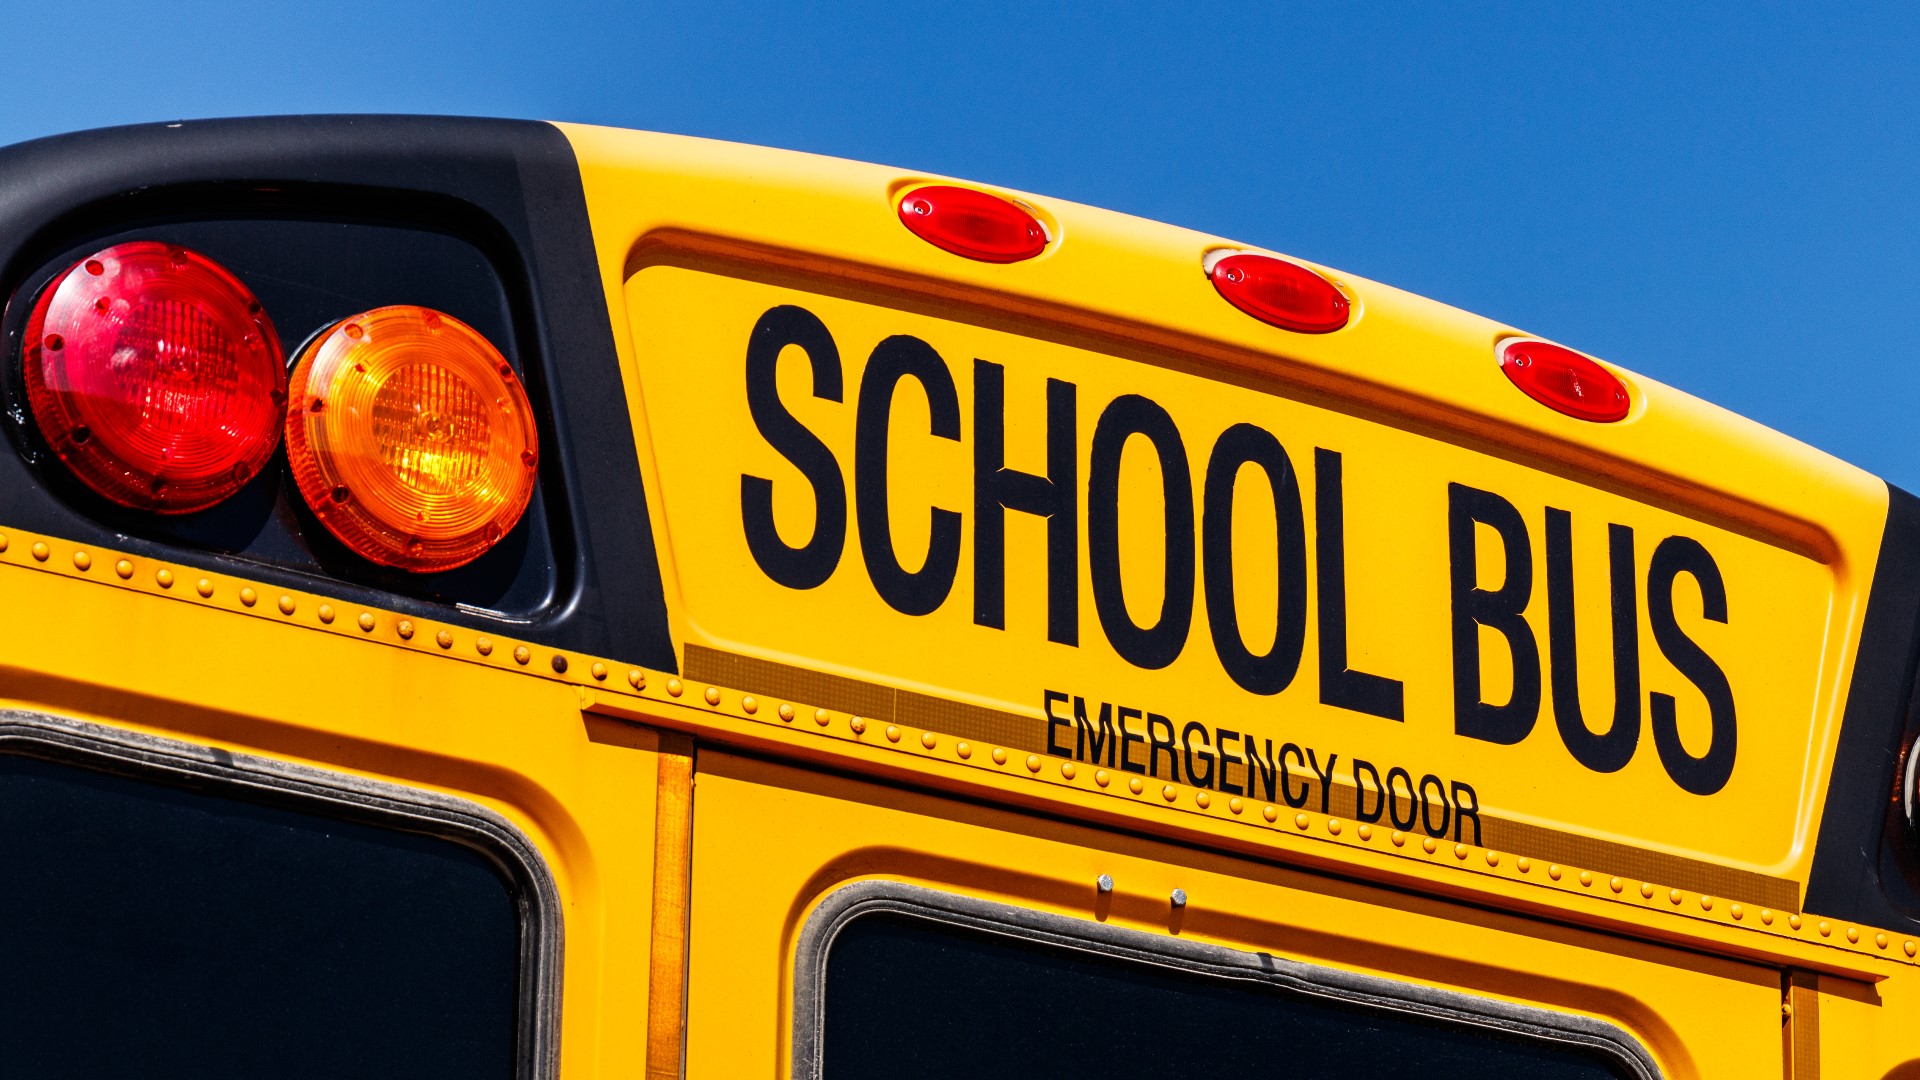 According to Newnan Police, another student told the bus driver that the child had the loaded gun as they were getting off the bus (bus 61-08). Officials said the bus driver immediately checked the accused student's book bag and found the Ruger .38 caliber pistol.